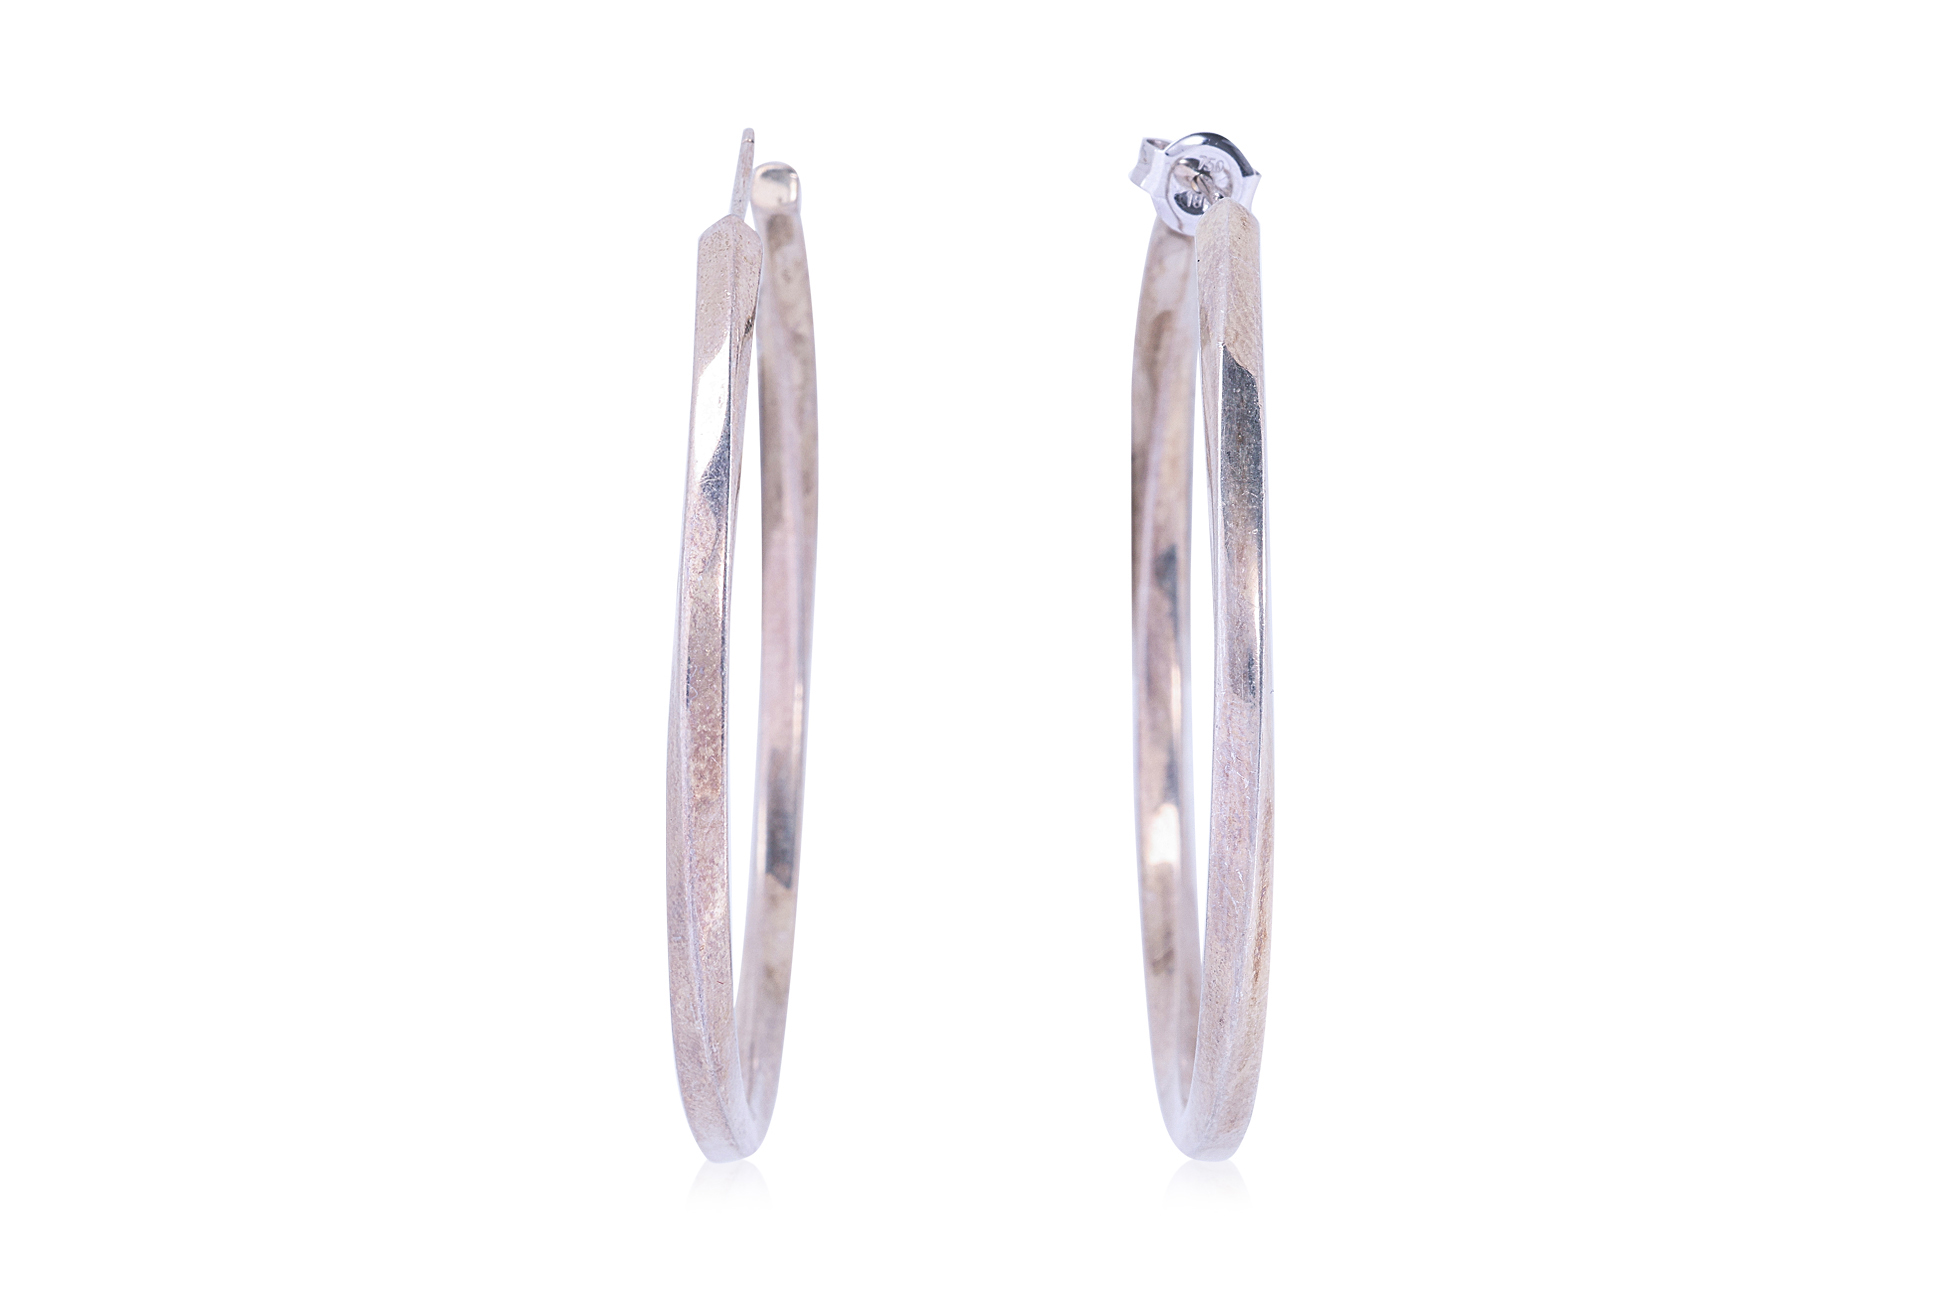 TWO PAIRS OF LARGE TWISTED HOOP EARRINGS BY TIFFANY & CO. - Image 3 of 5